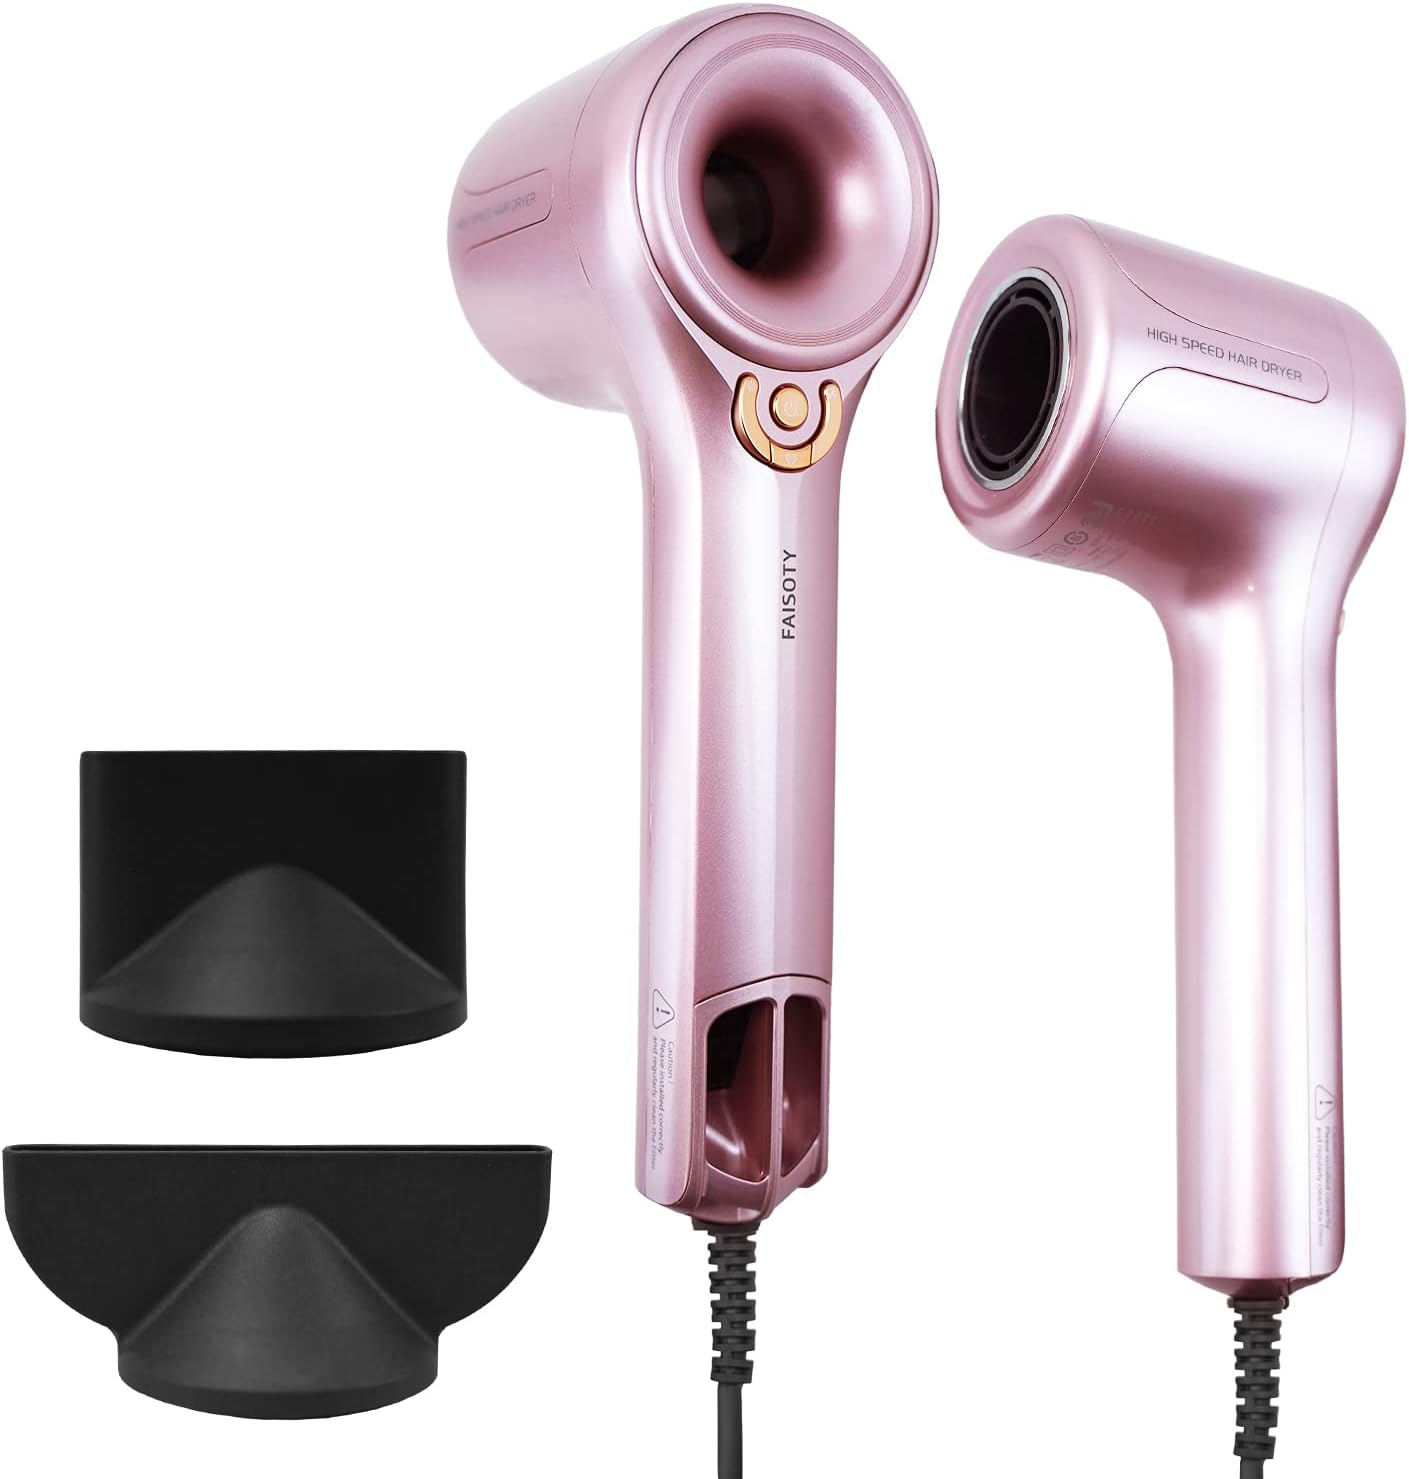 FAISOTY Hair Dryer, Ionic Blow Dryer with 110,000 RPM [...]